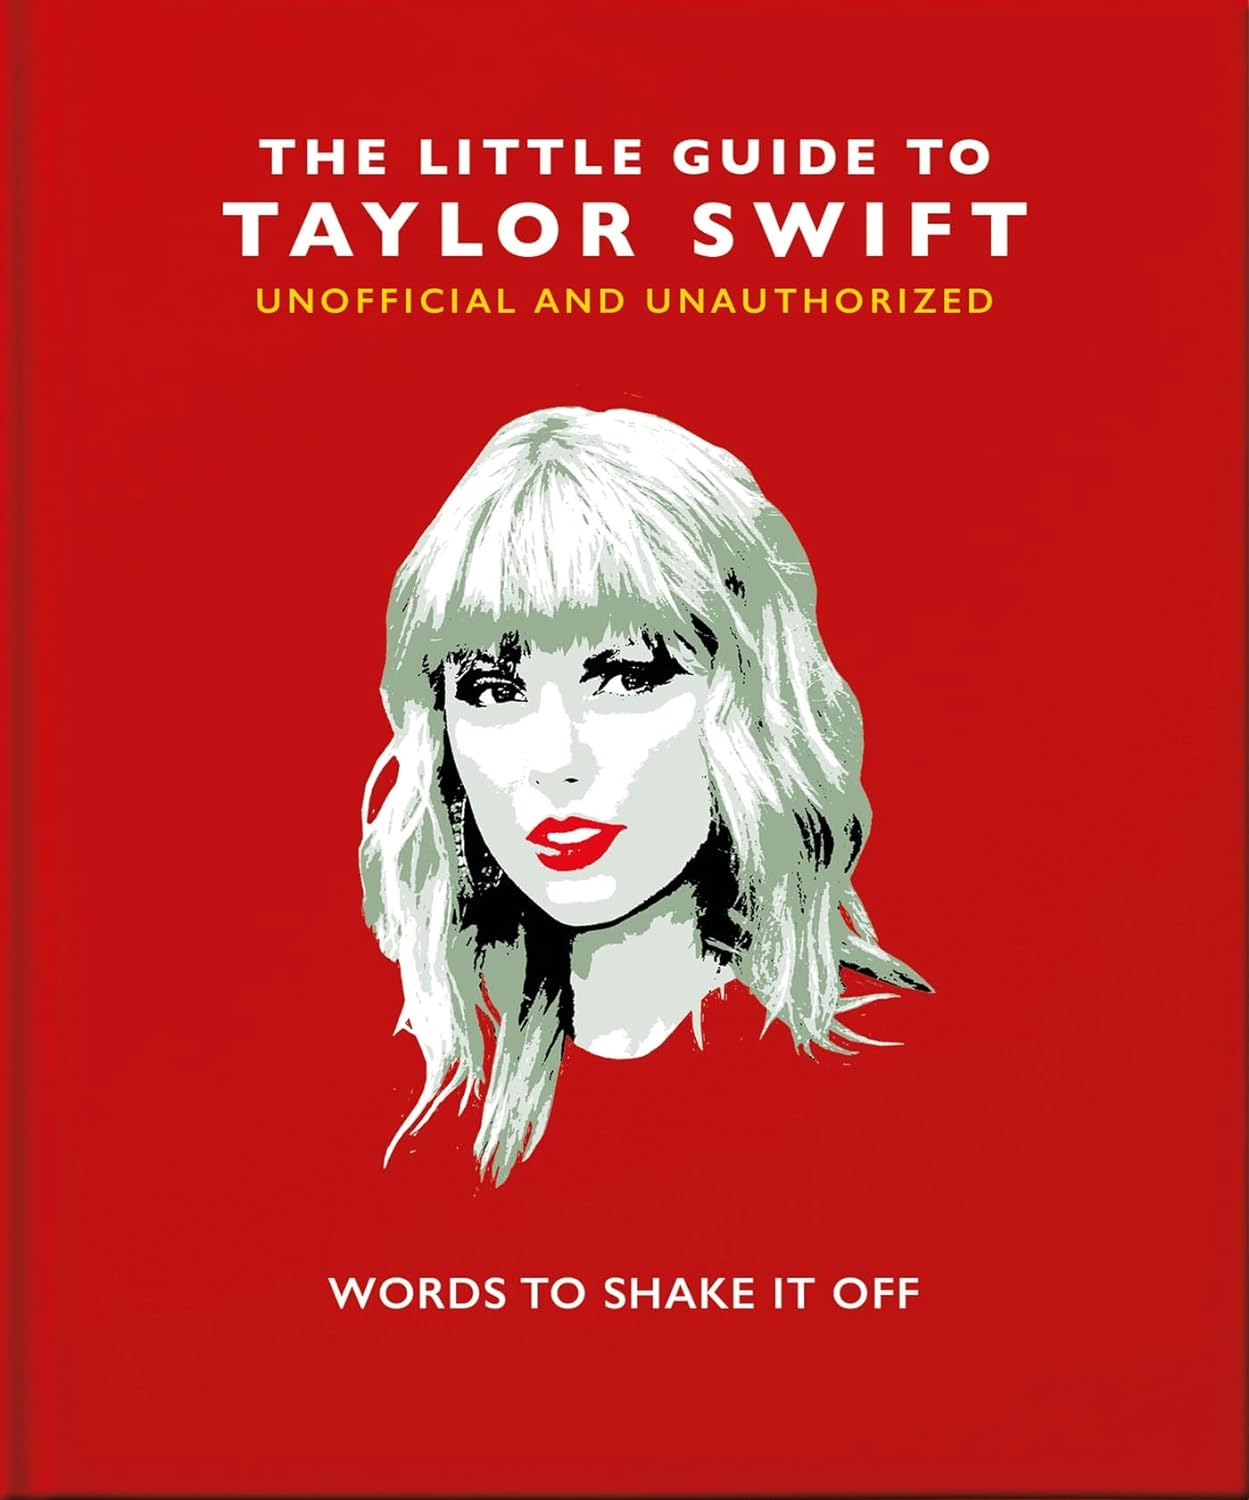 The Little Book Guide to Taylor Swift